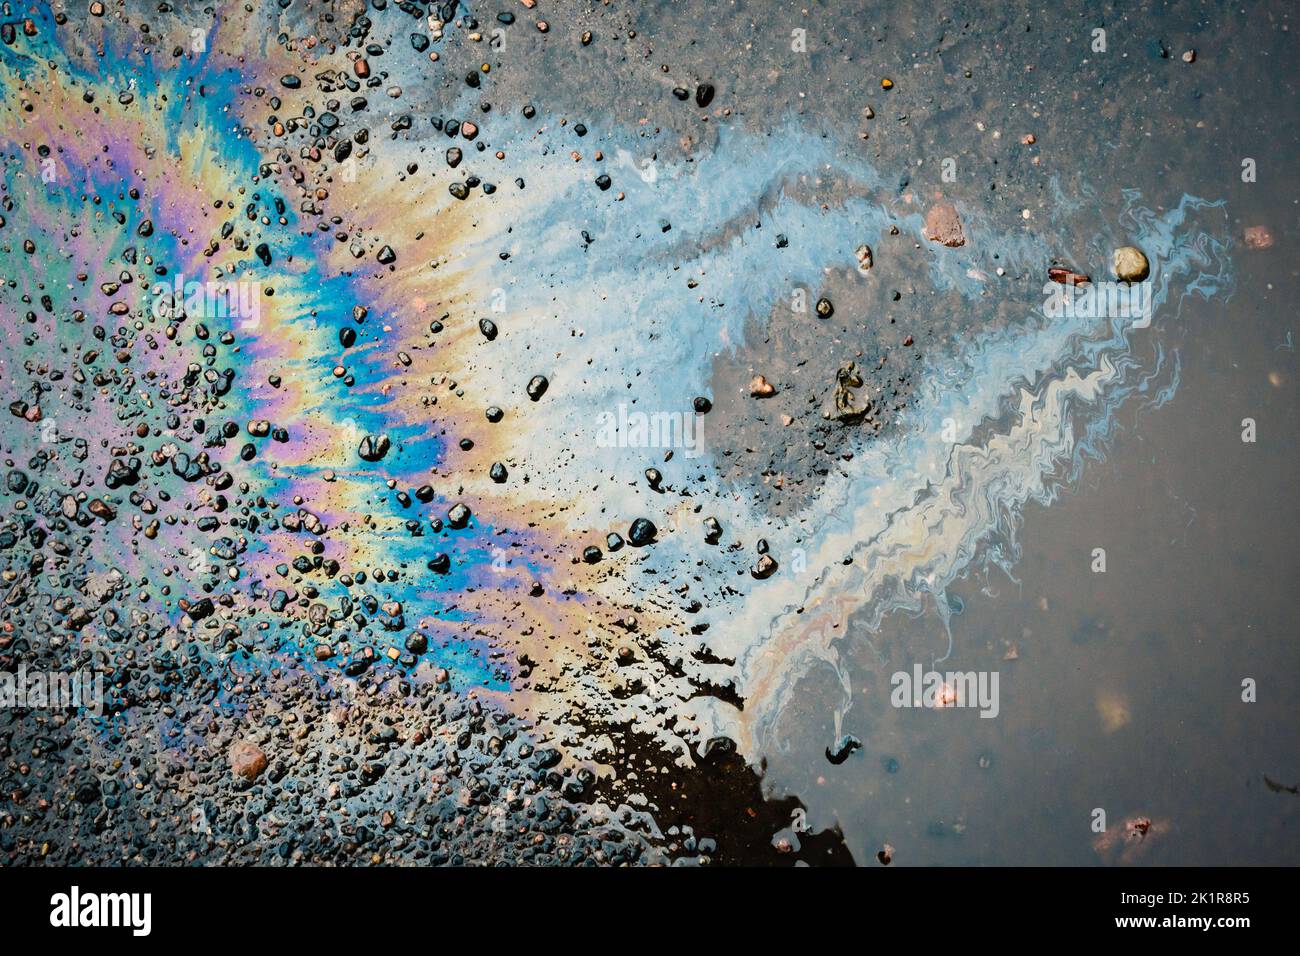 Dirty Multi Colored Stain From Engine Oil On Asphalt Stock Photo Alamy